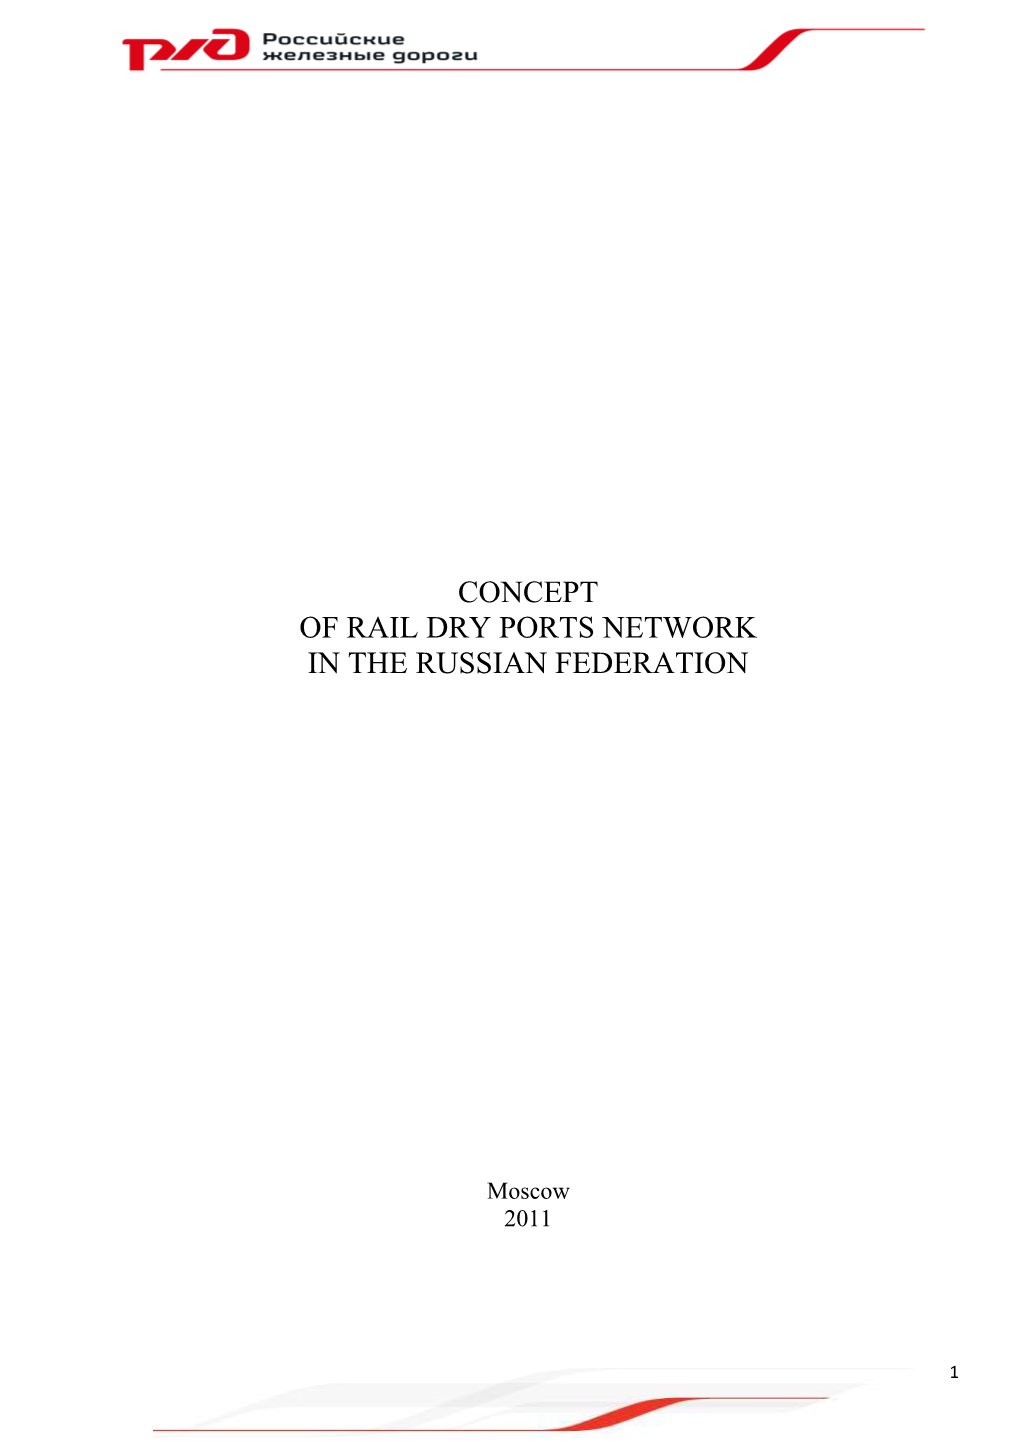 Concept of Rail Dry Ports Network in the Russian Federation